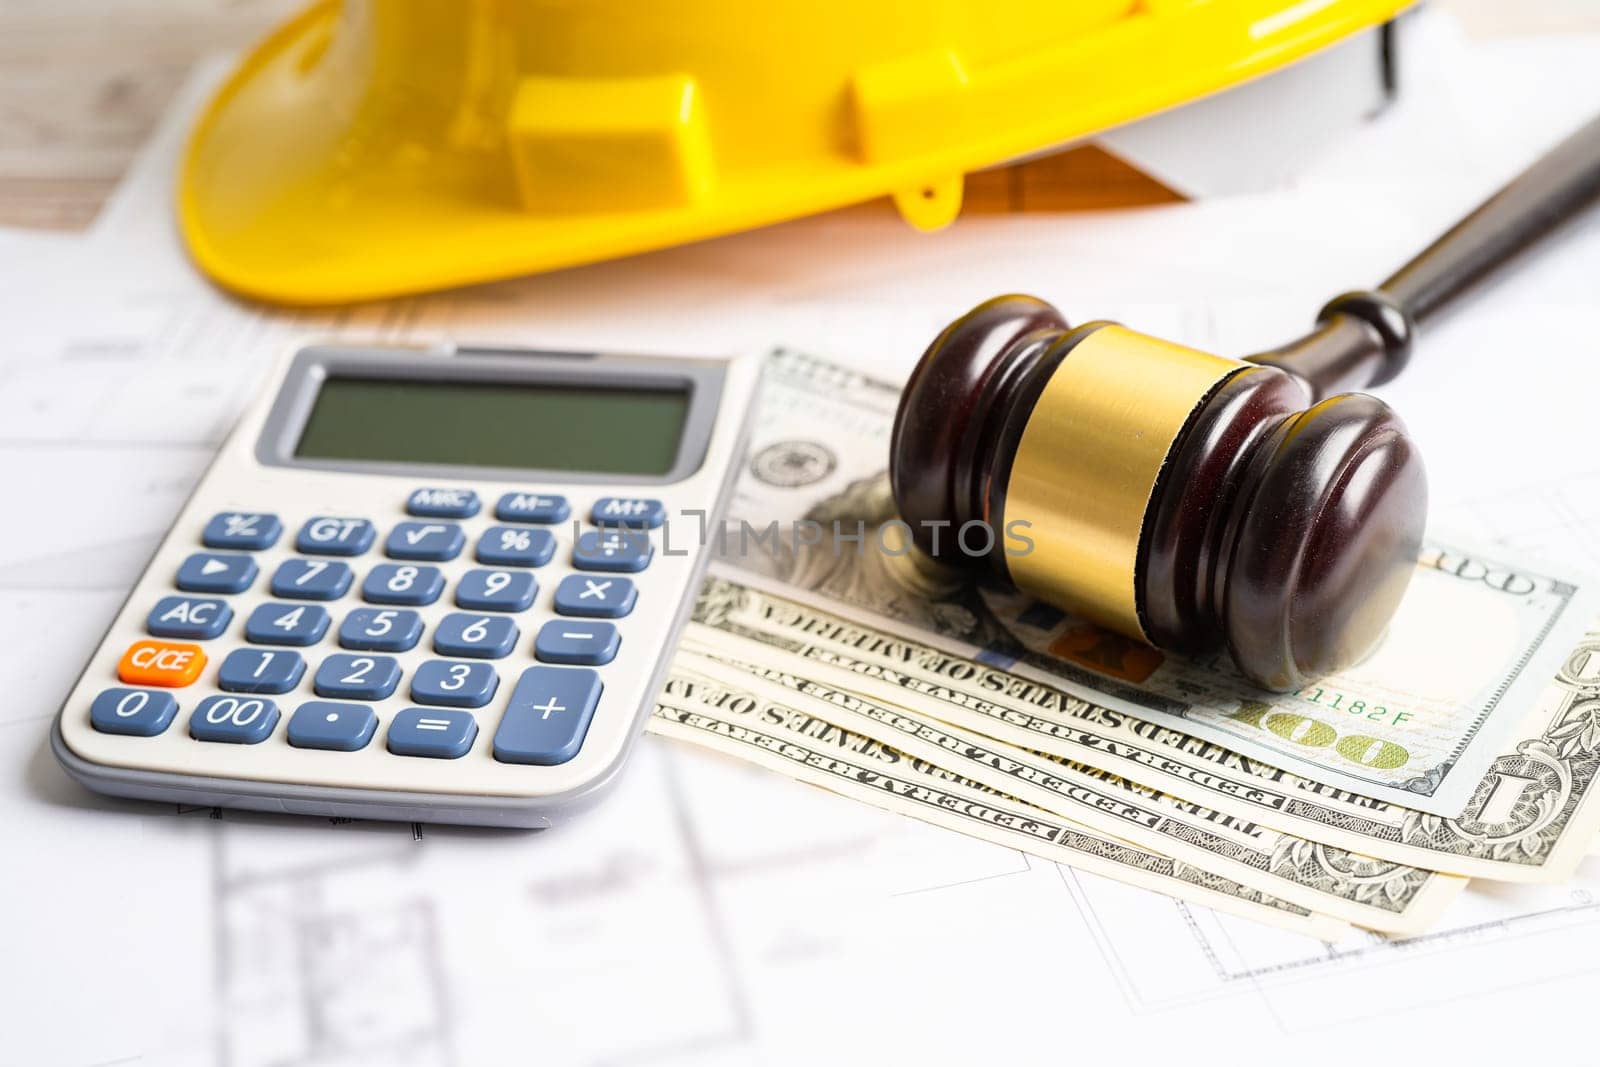 Architectural house plan project blueprint and Judge gavel hammer with yellow helmet and US dollar banknotes, Engineer and construction law and justice.